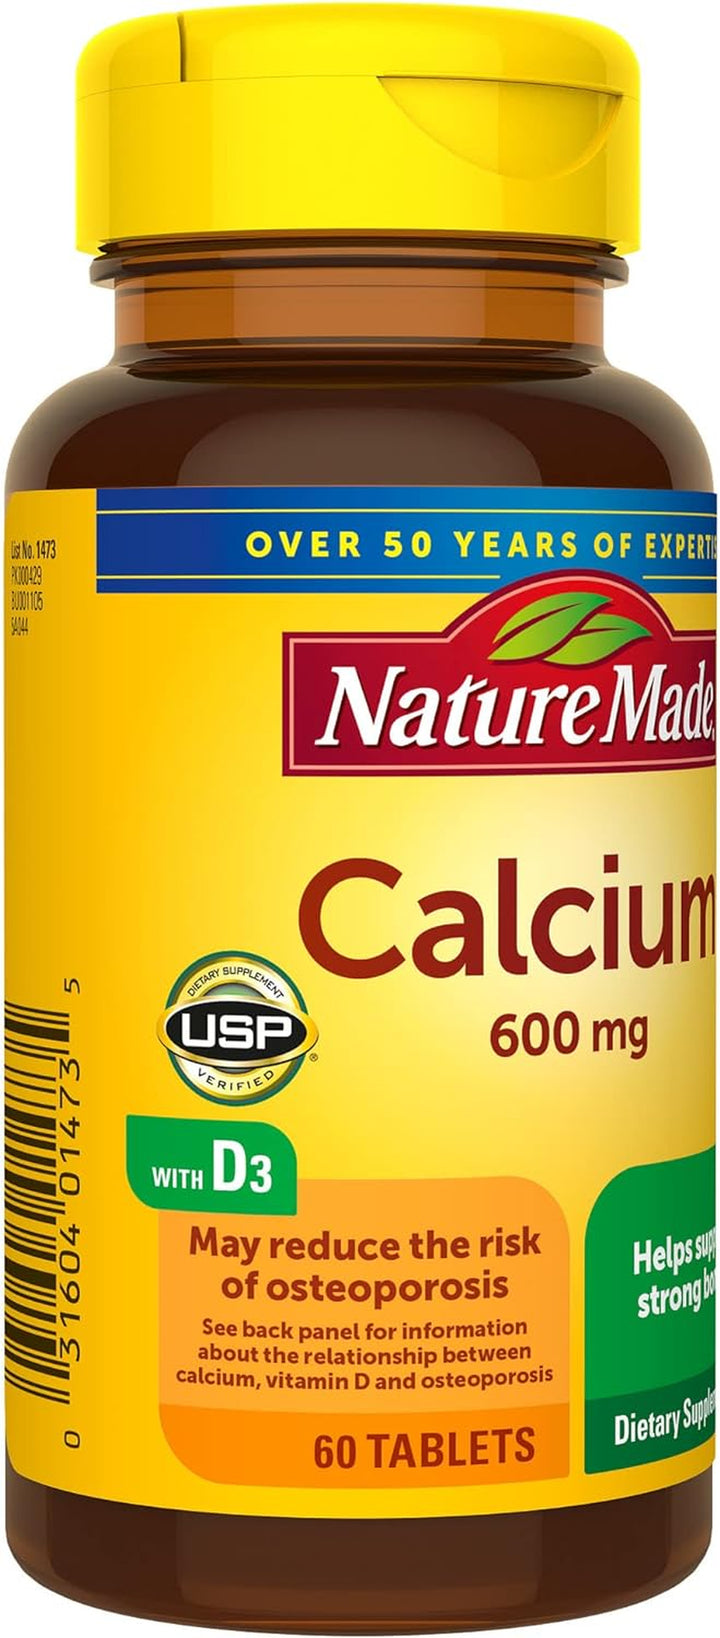 Nature Made Calcium 600 Mg with Vitamin D3 for Immune Support, Tablets, 60 Count, Helps Support Bone Strength (Pack of 3)